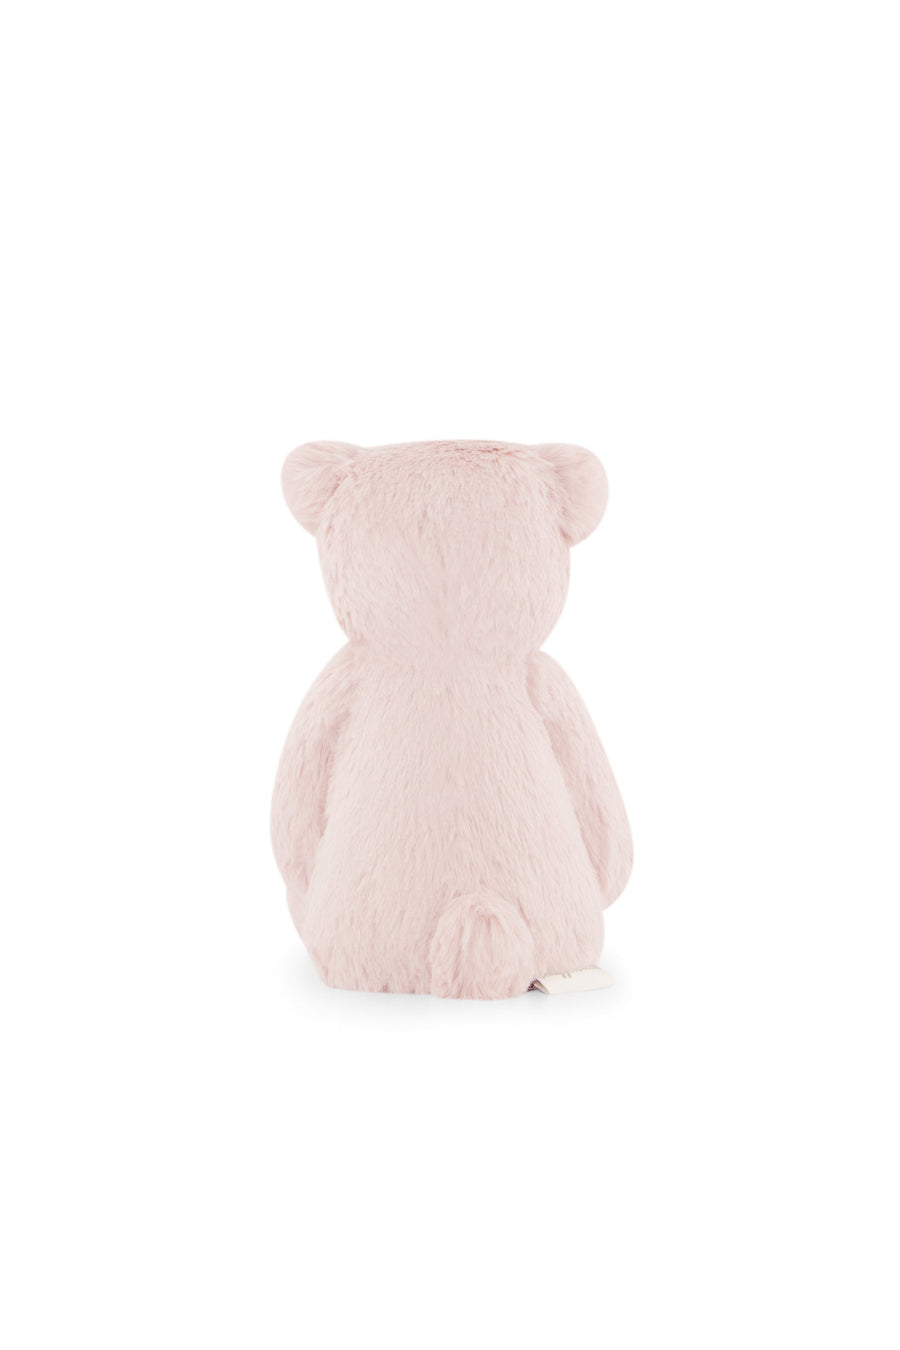 Snuggle Bunnies - George the Bear - Blush Childrens Toy from Jamie Kay NZ